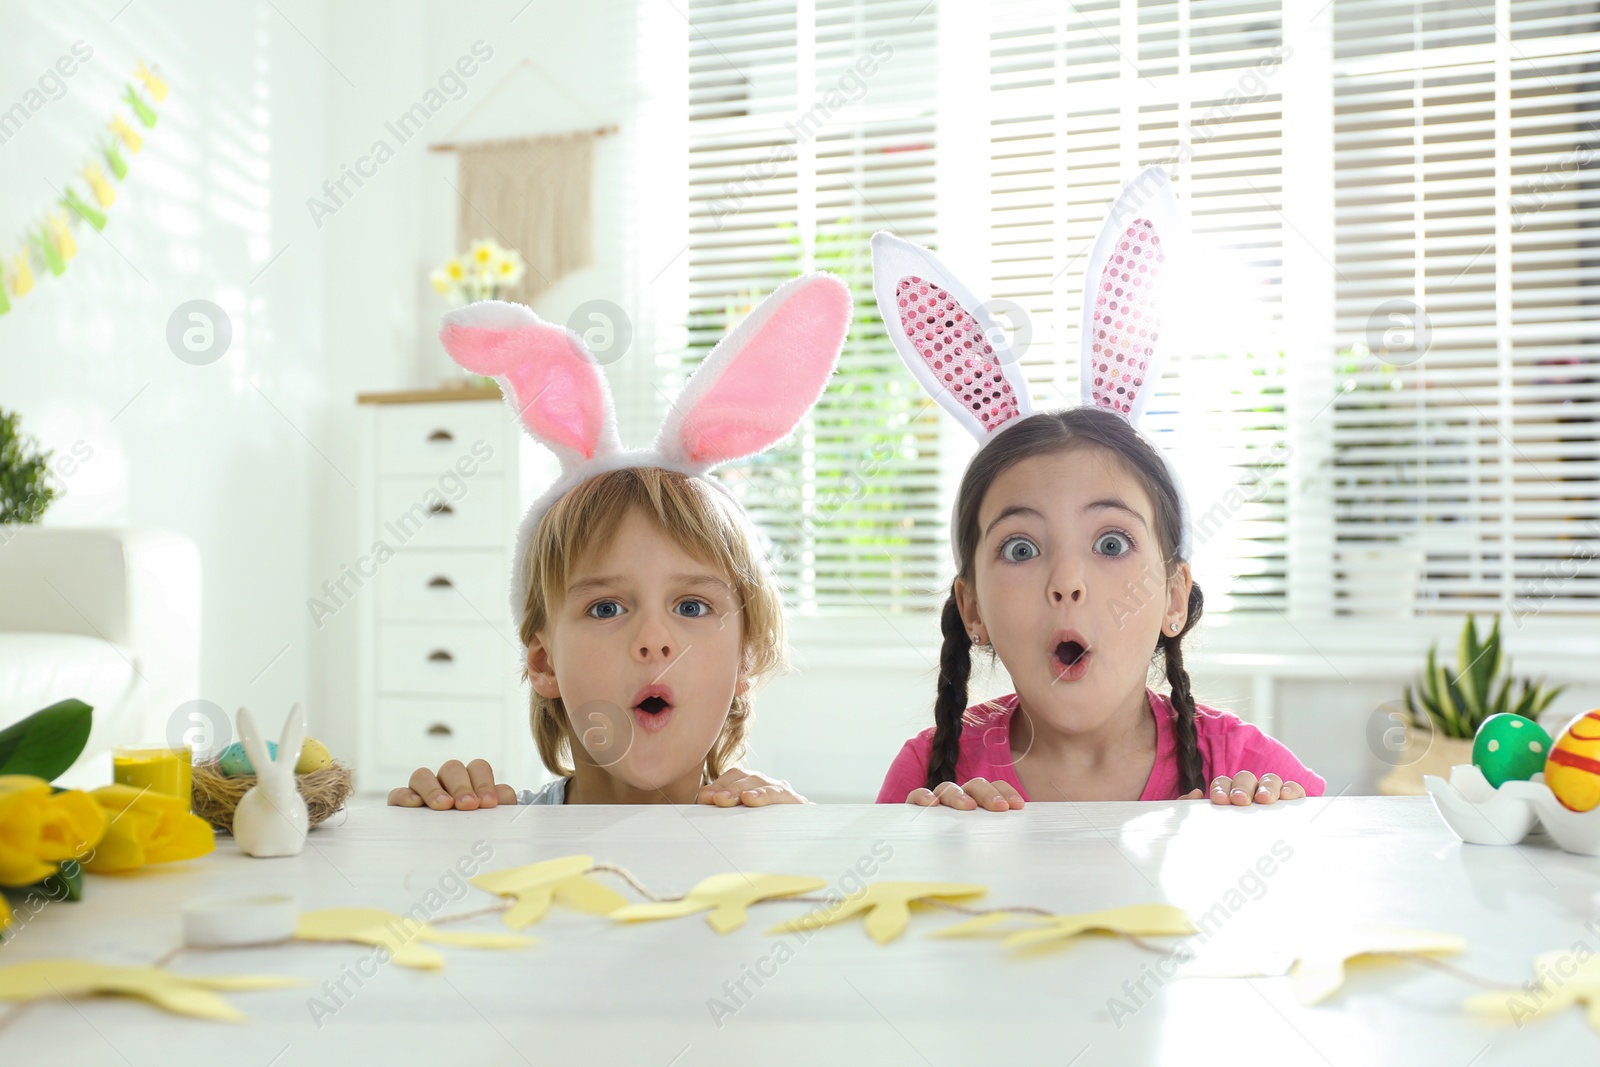 Photo of Emotional children wearing bunny ears headbands at table with Easter eggs, indoors